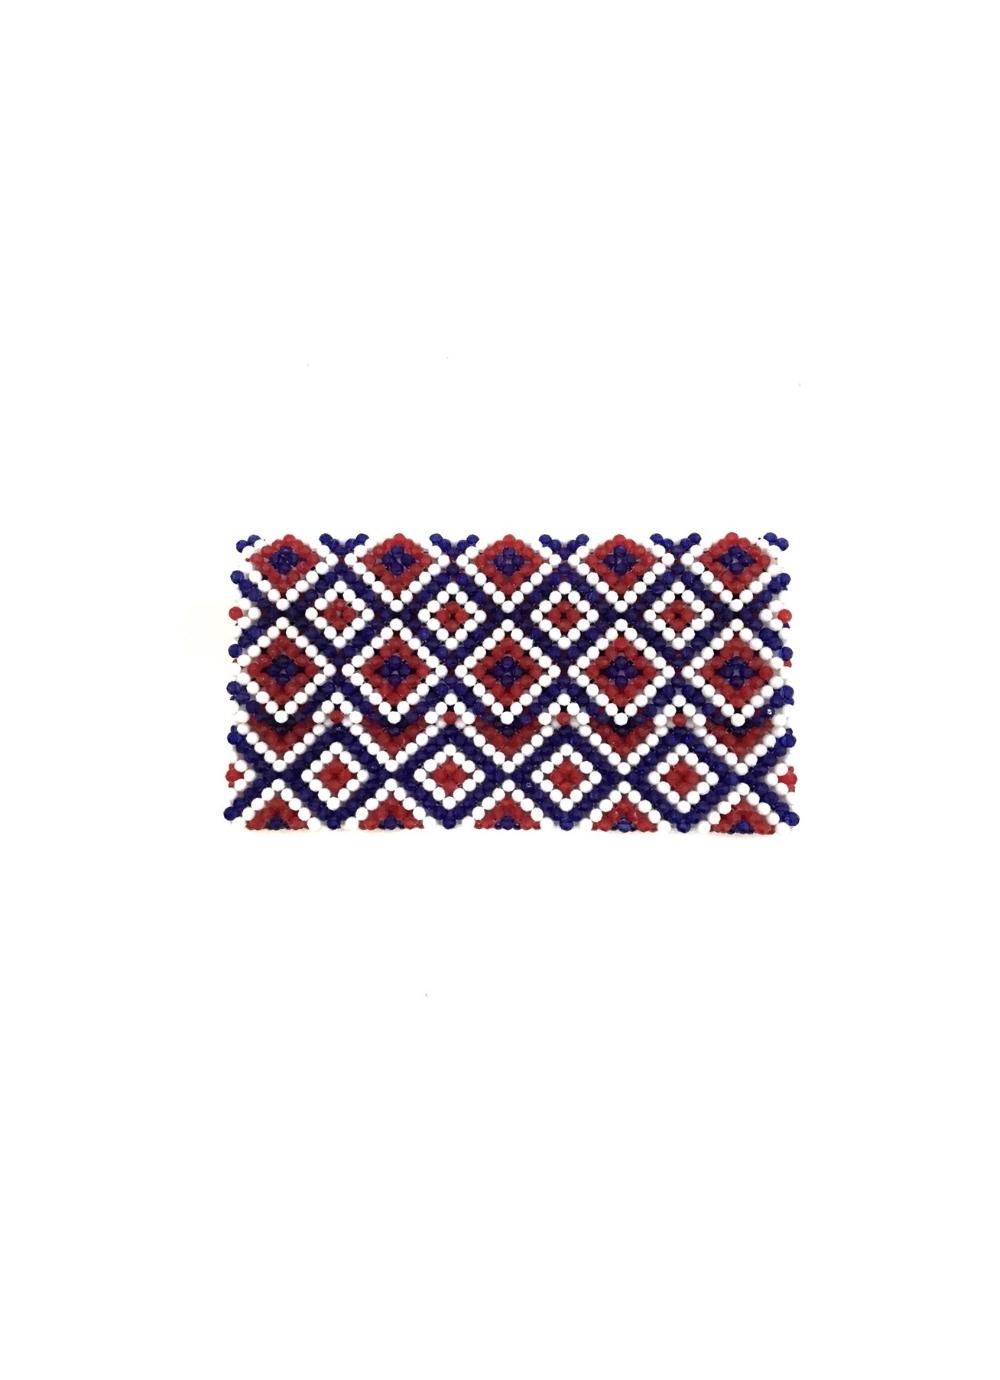 Beaded Clutch Bag (Small)